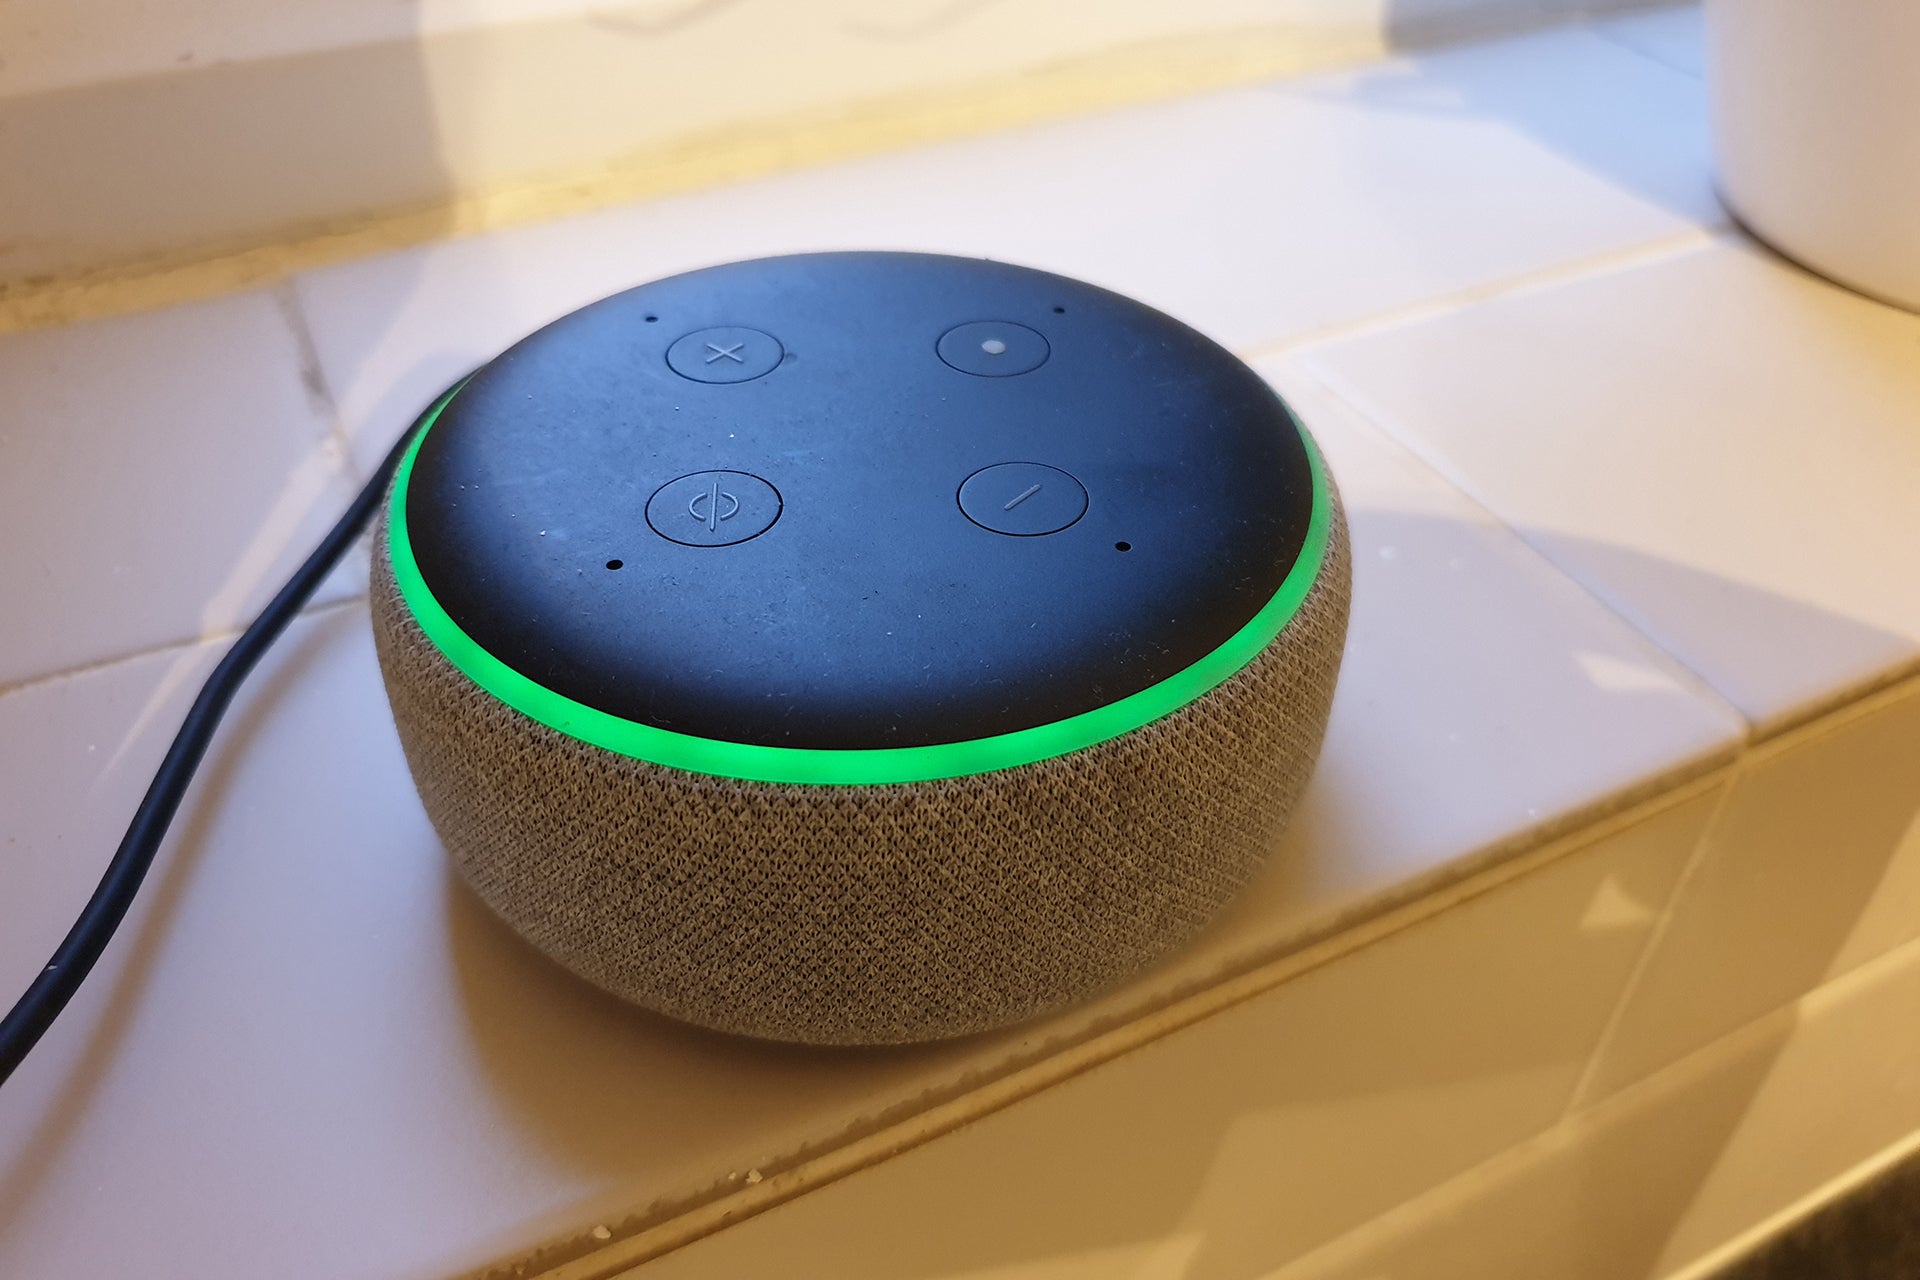 How to Change the Color of Your Echo Dot?